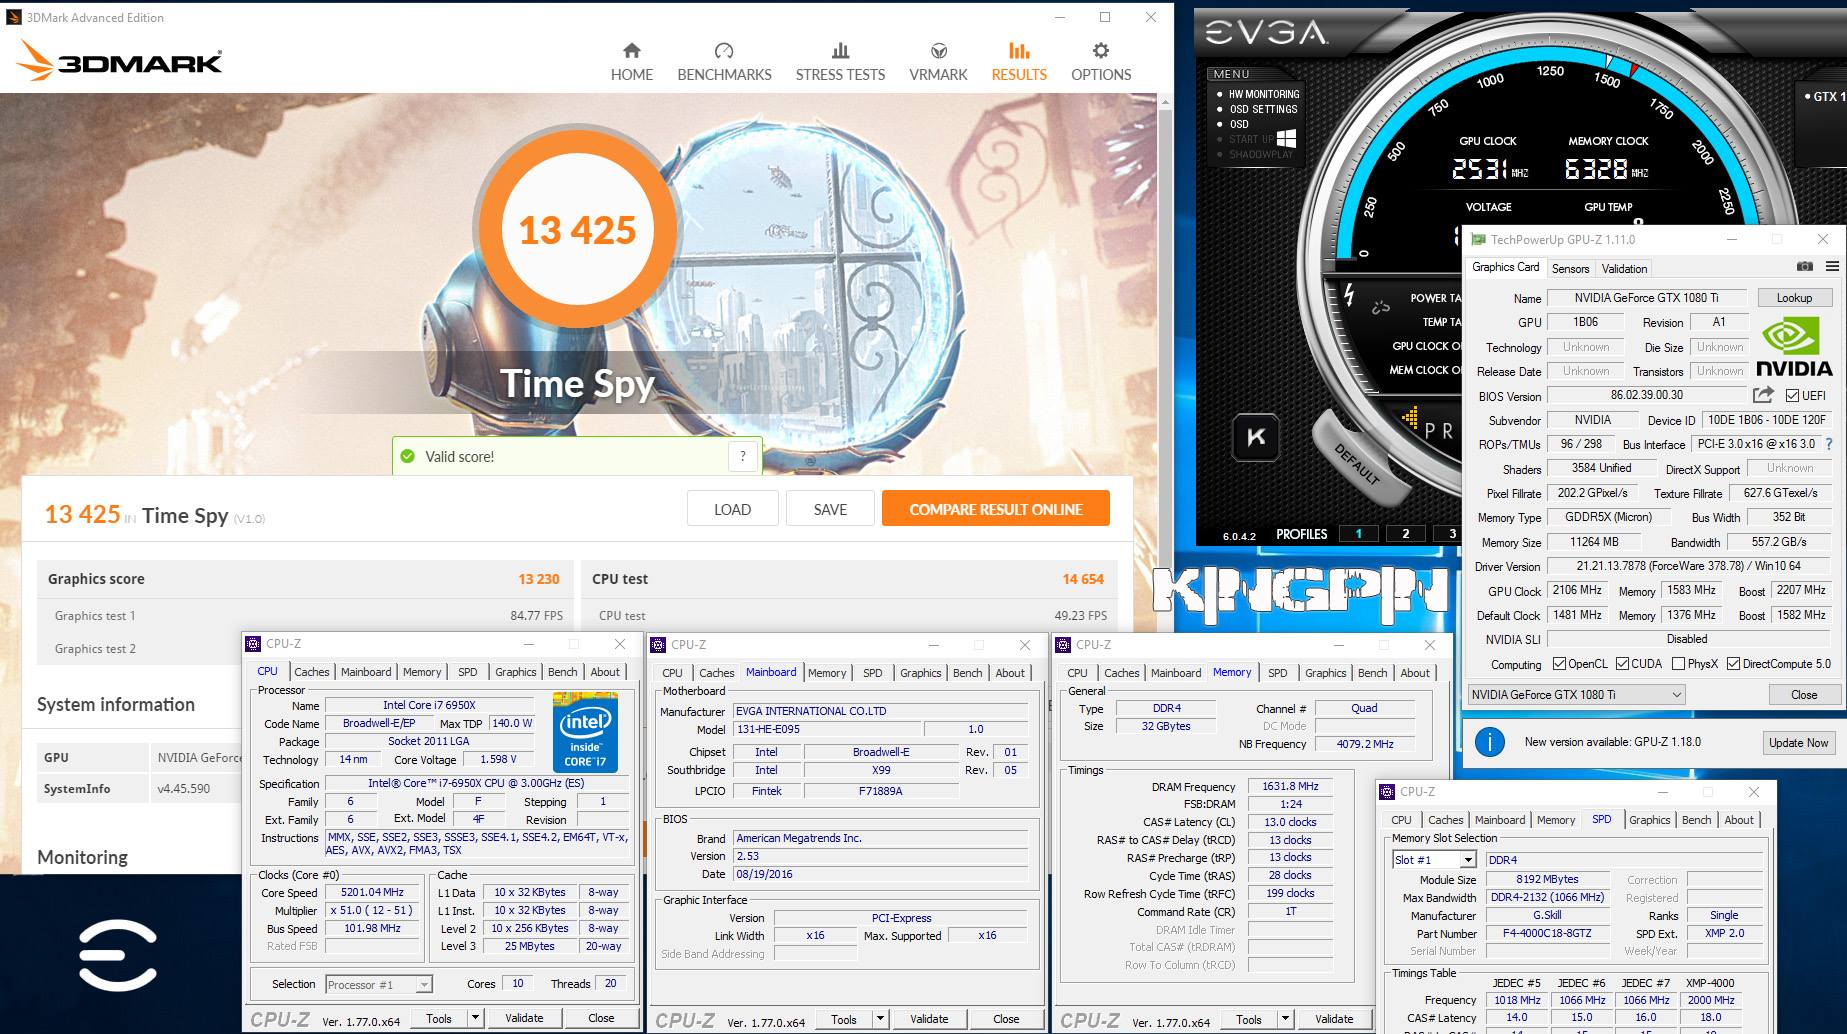 Media asset in full size related to 3dfxzone.it news item entitled as follows: Overclocking: una GeForce GTX 1080 Ti lavora a 2531MHz con azoto liquido | Image Name: news26213_NVIDIA_GeForce-GTX-1080-Ti_1.jpg